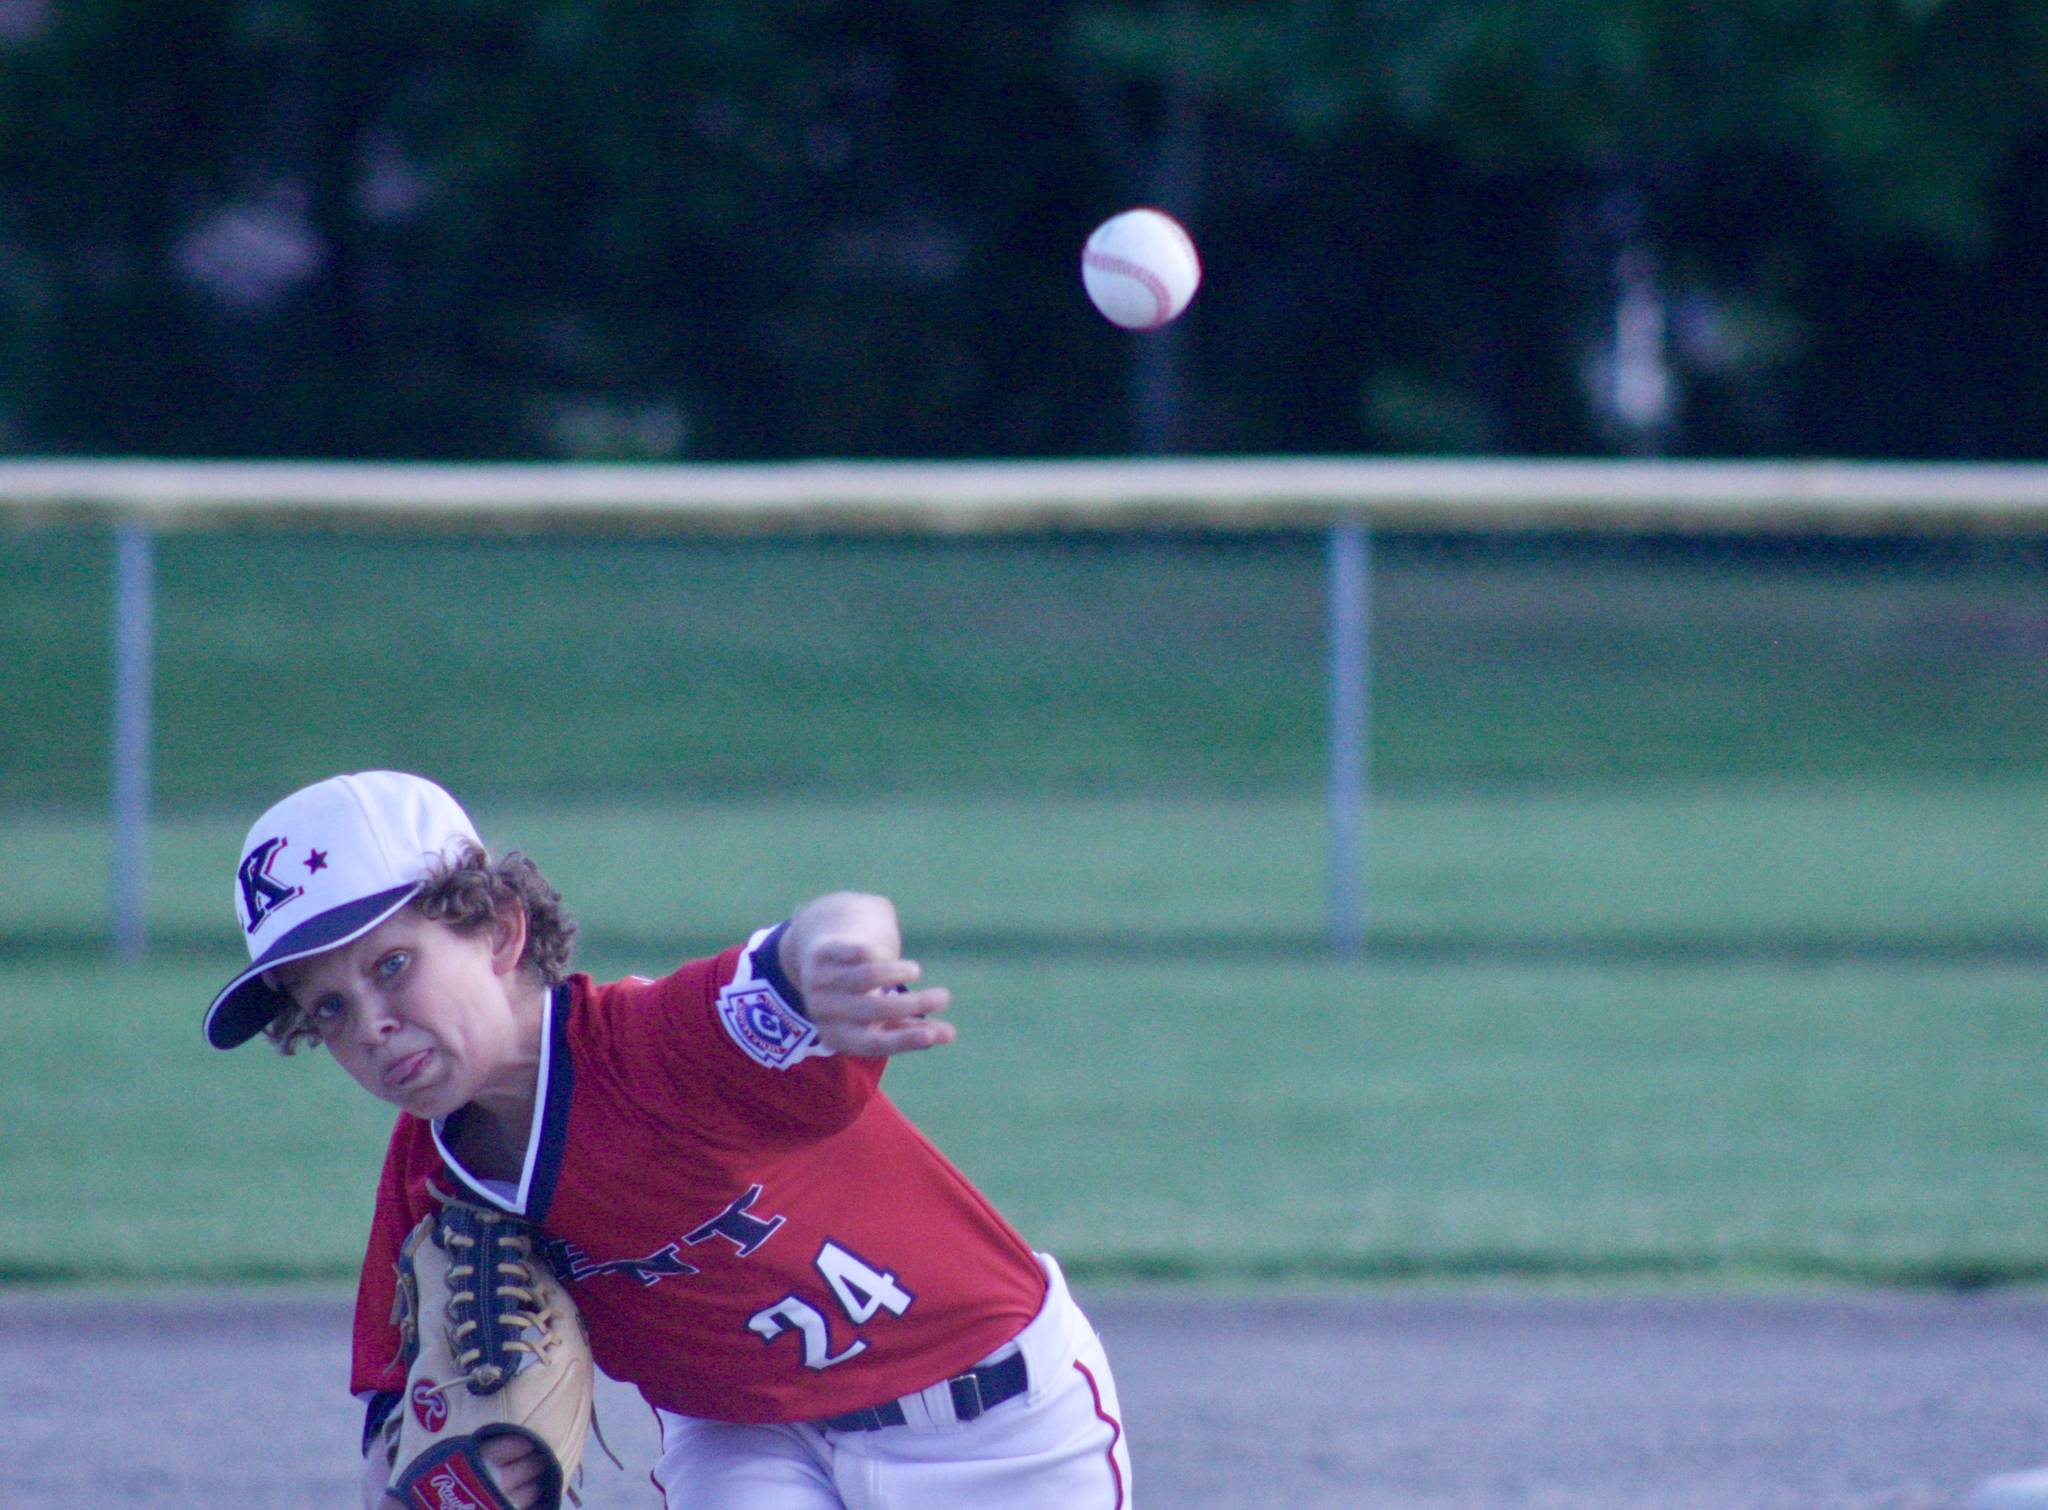 The Kent All-Stars’ Ethan Loghry delivers a pitch during his stout performance against FME/Steel Lake on Thursday. Loghry pitched into the sixth inning before reaching his 85-pitch limit. MARK KLAAS, Kent Reporter